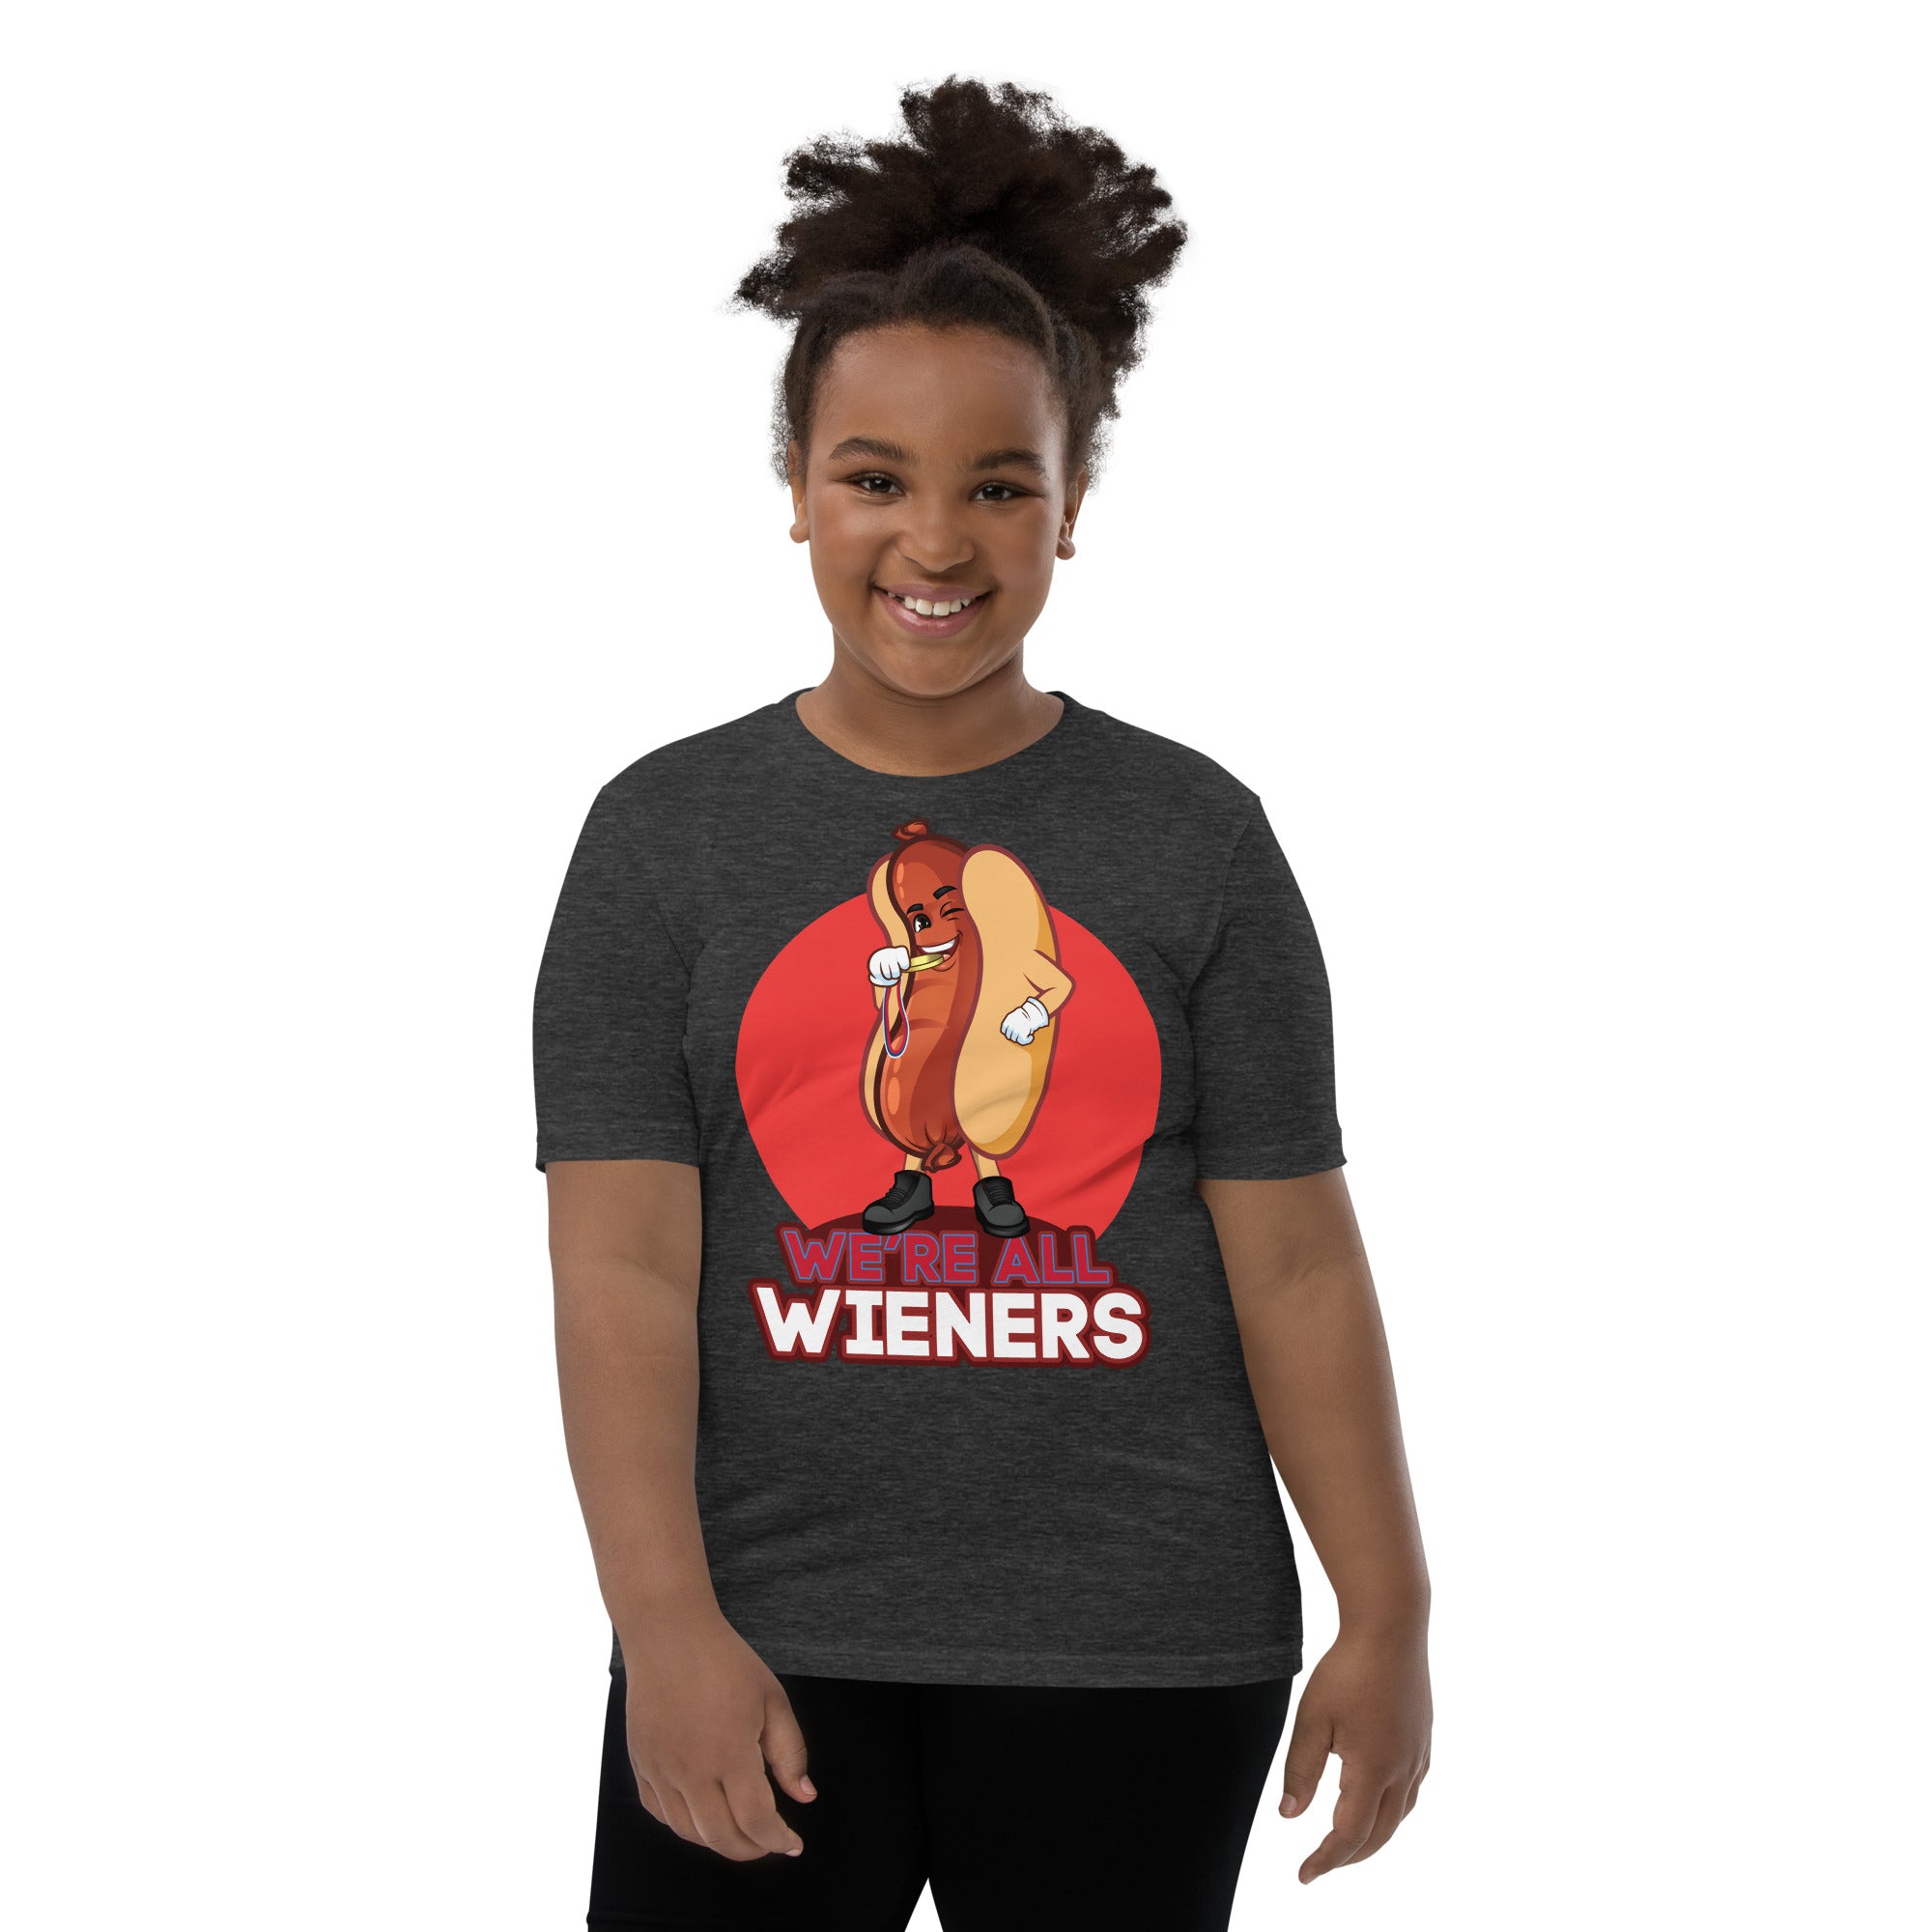 We're All Wieners - Youth Short Sleeve T-Shirt - Red